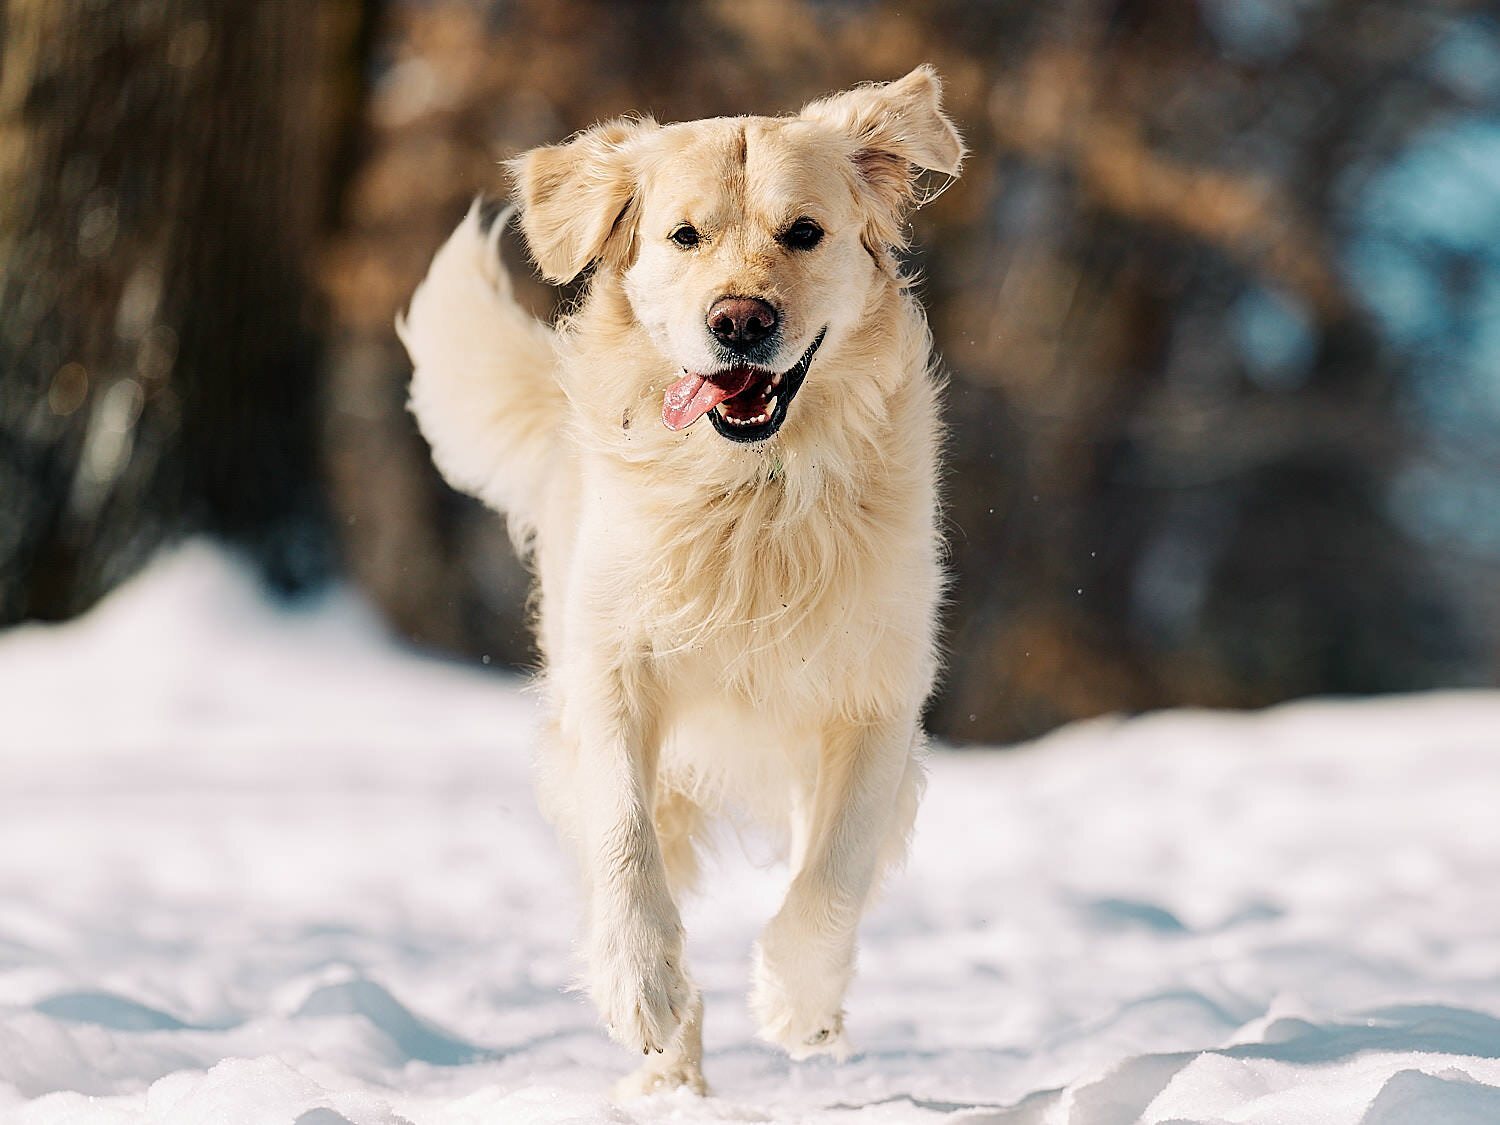  Joyka the Golden retriever dog is enjoying sunshine and snow on an extremely cold day in Western Pennsylvania. He is jumping for joy in the snow, catching icicles and snowflakes. All’s white and blue. 